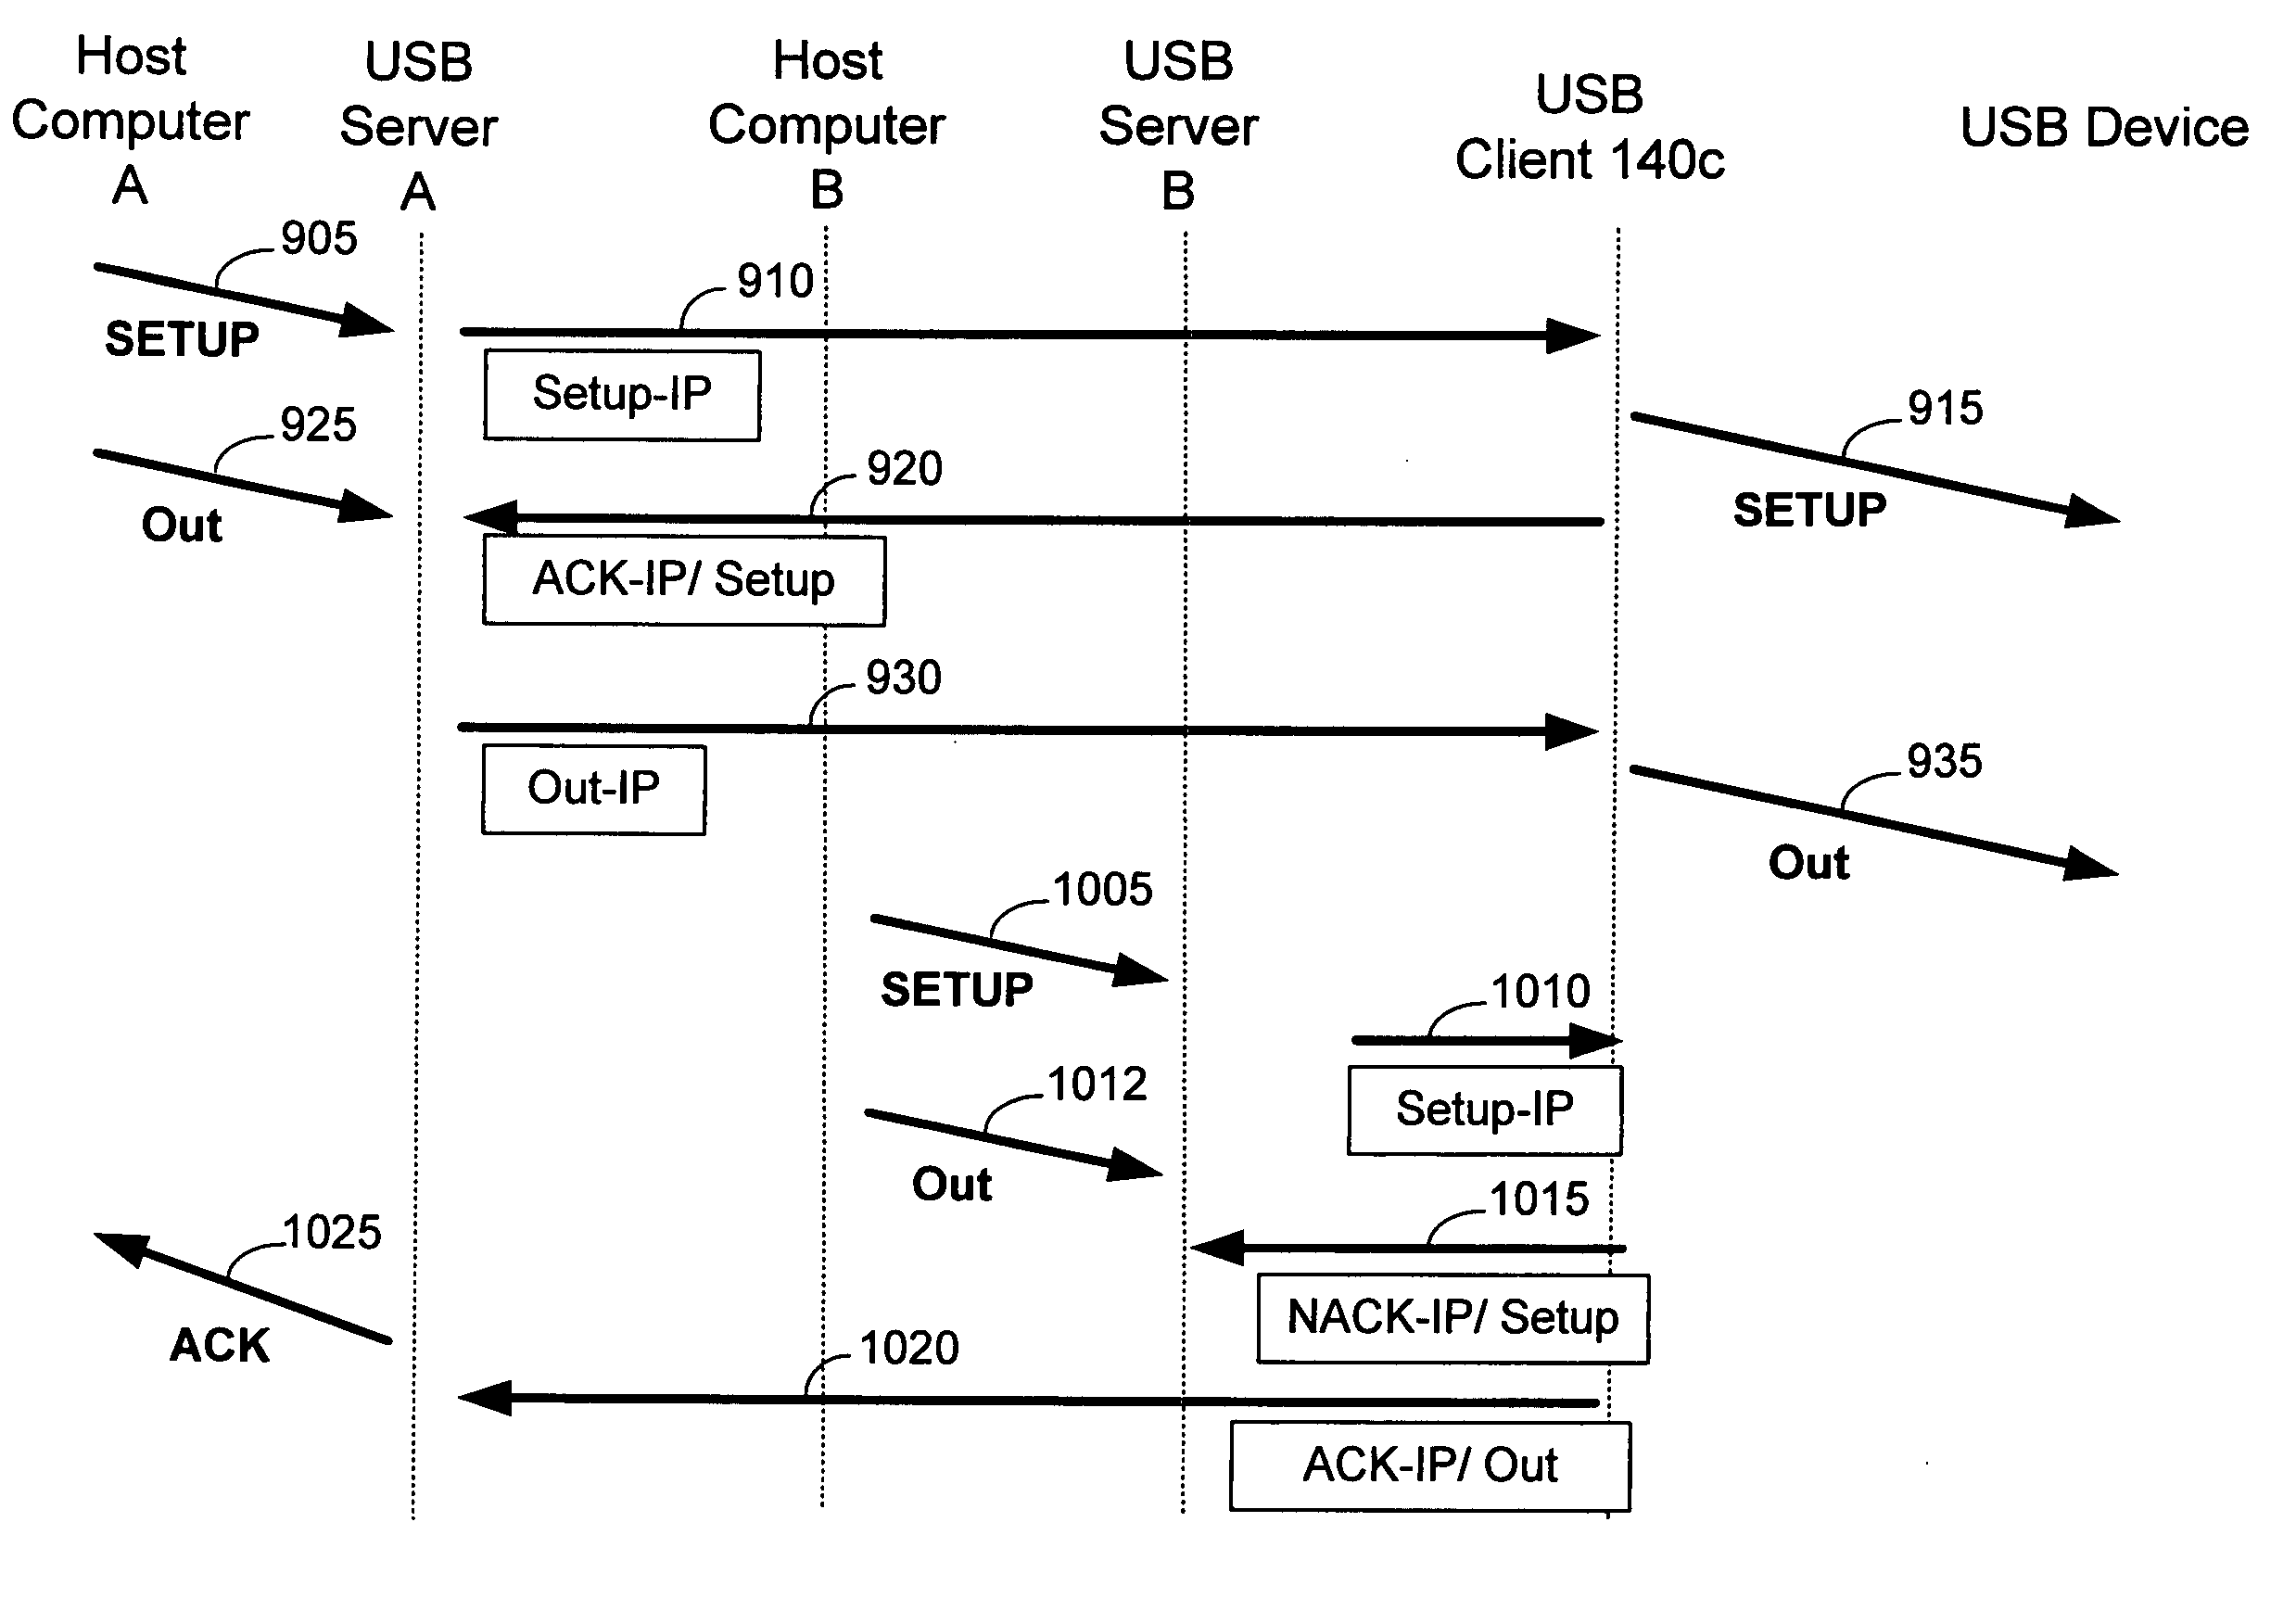 Method and system for controlling transmission of USB messages over a data network between a USB device and a plurality of host computers